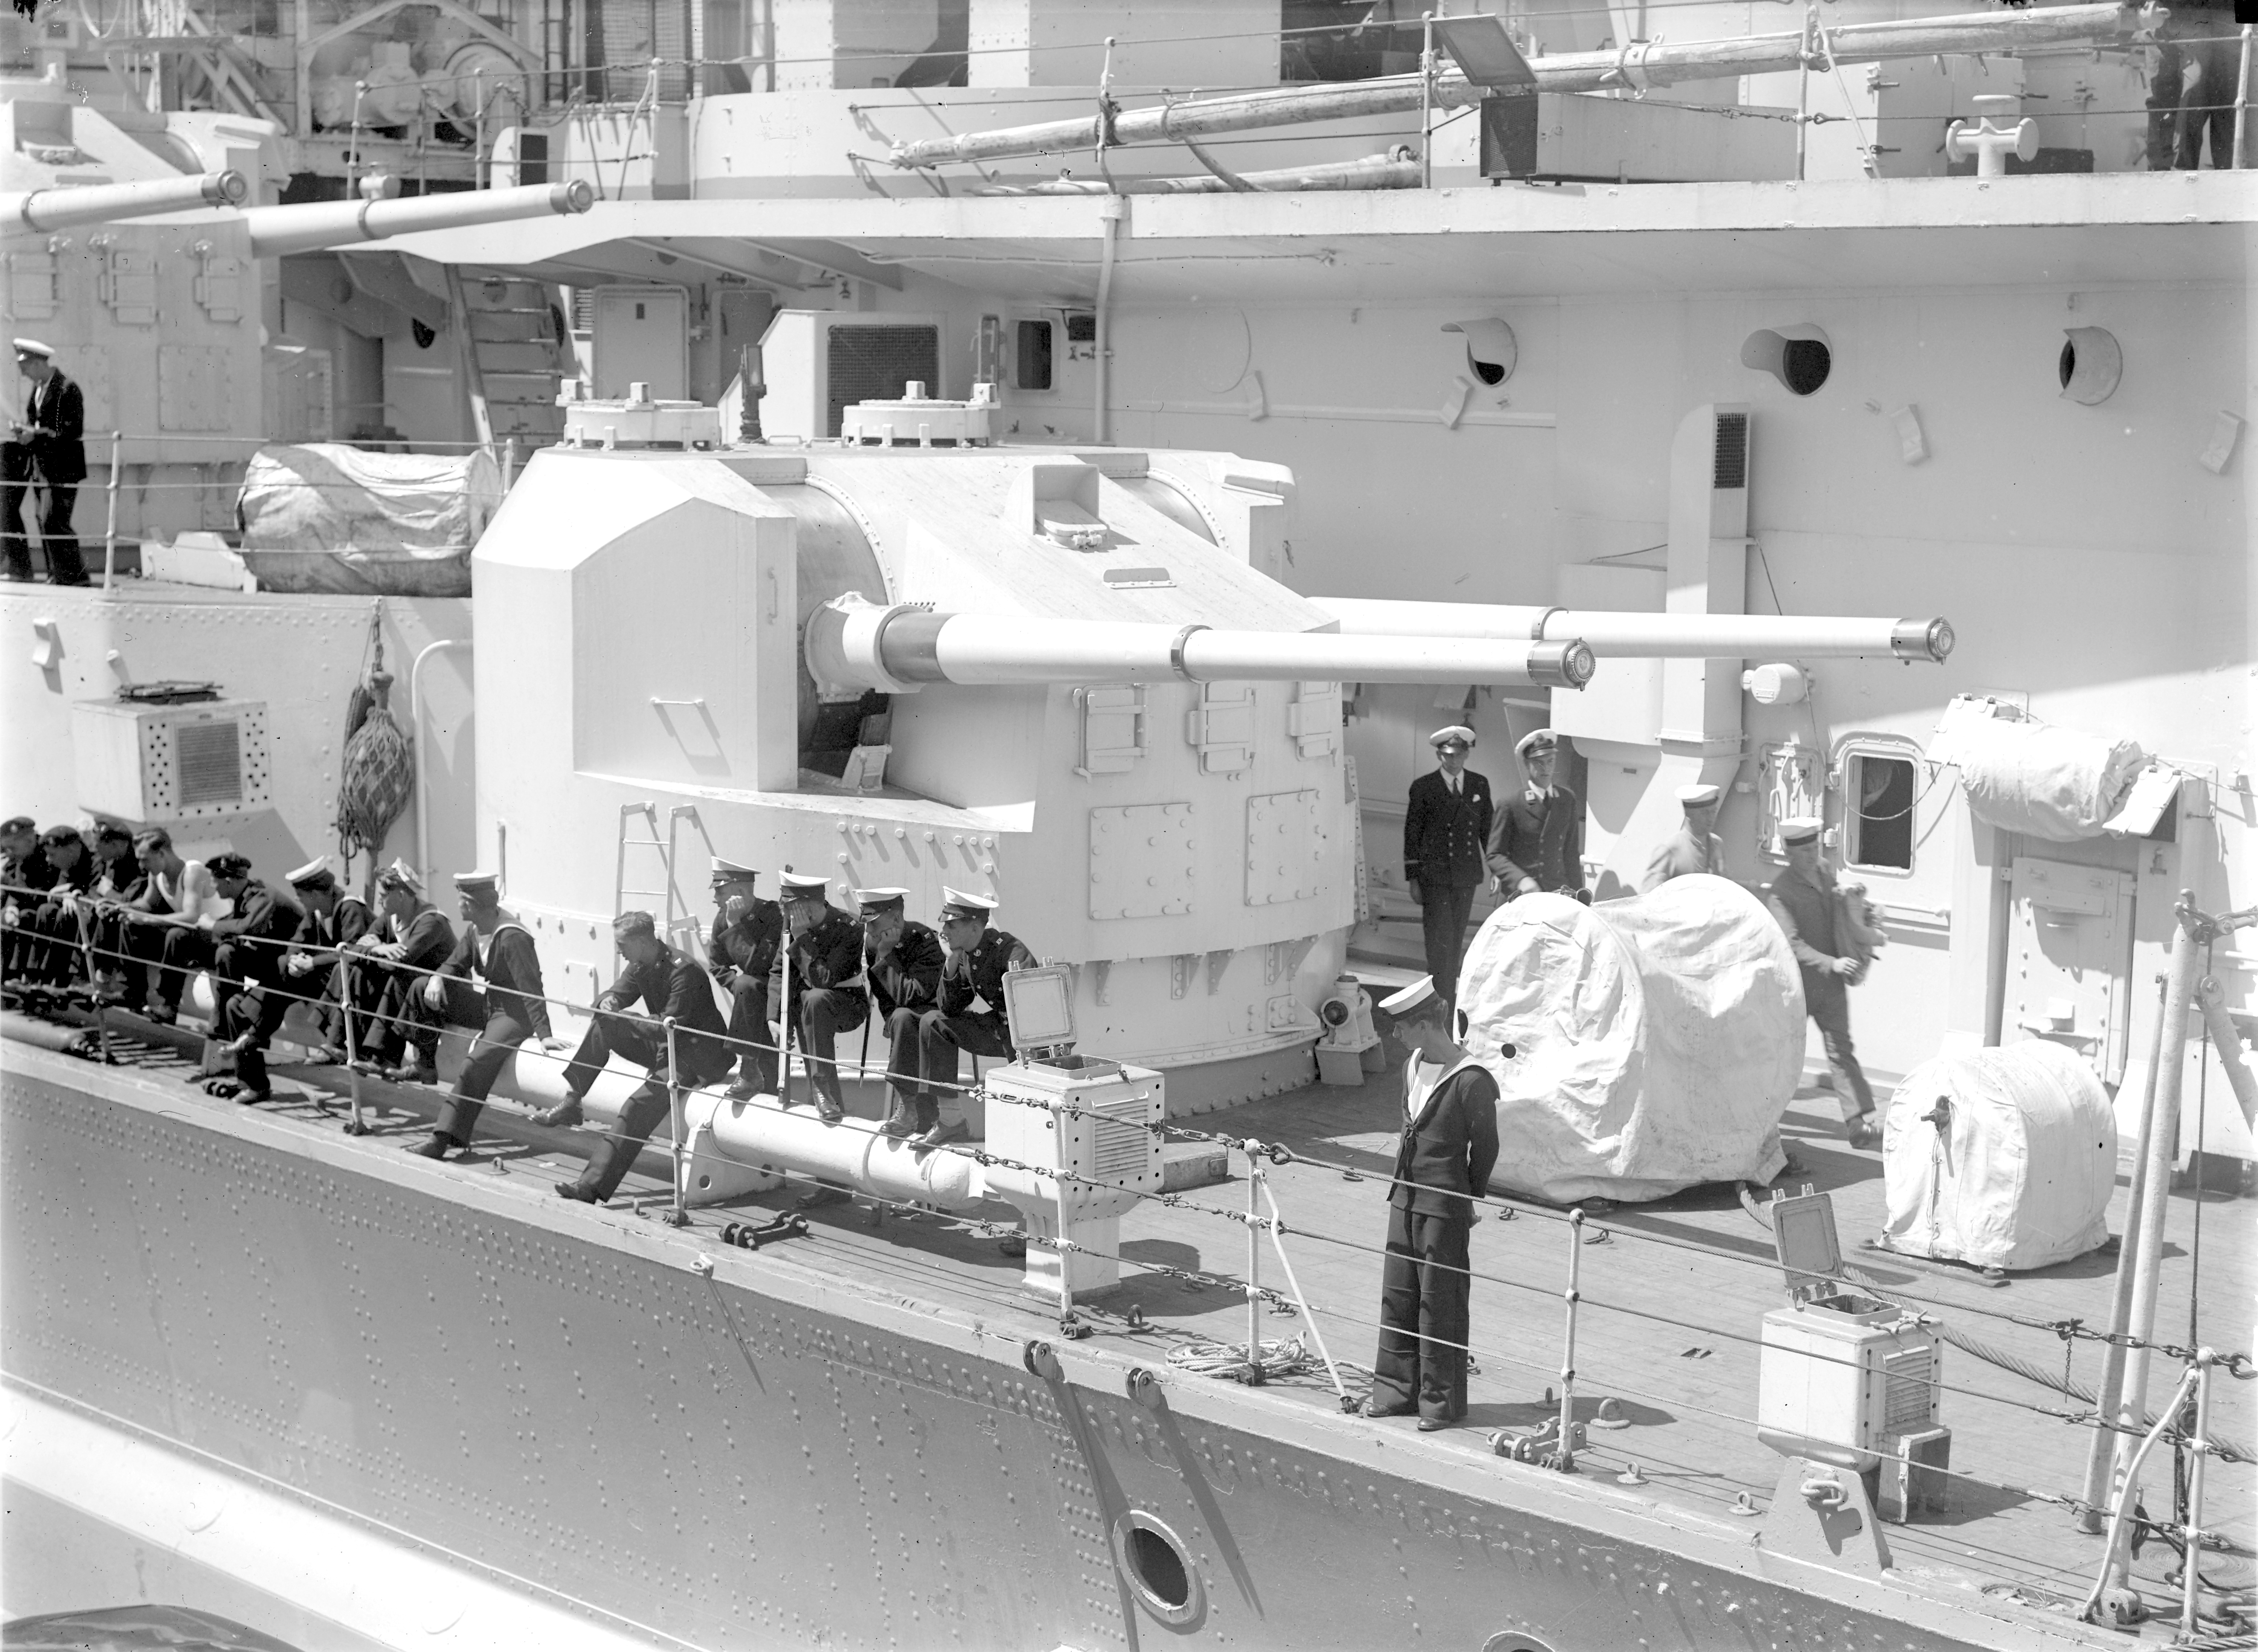 Close-up of one of HMS King George V's secondary gun turrets and various officers and crew, 1945